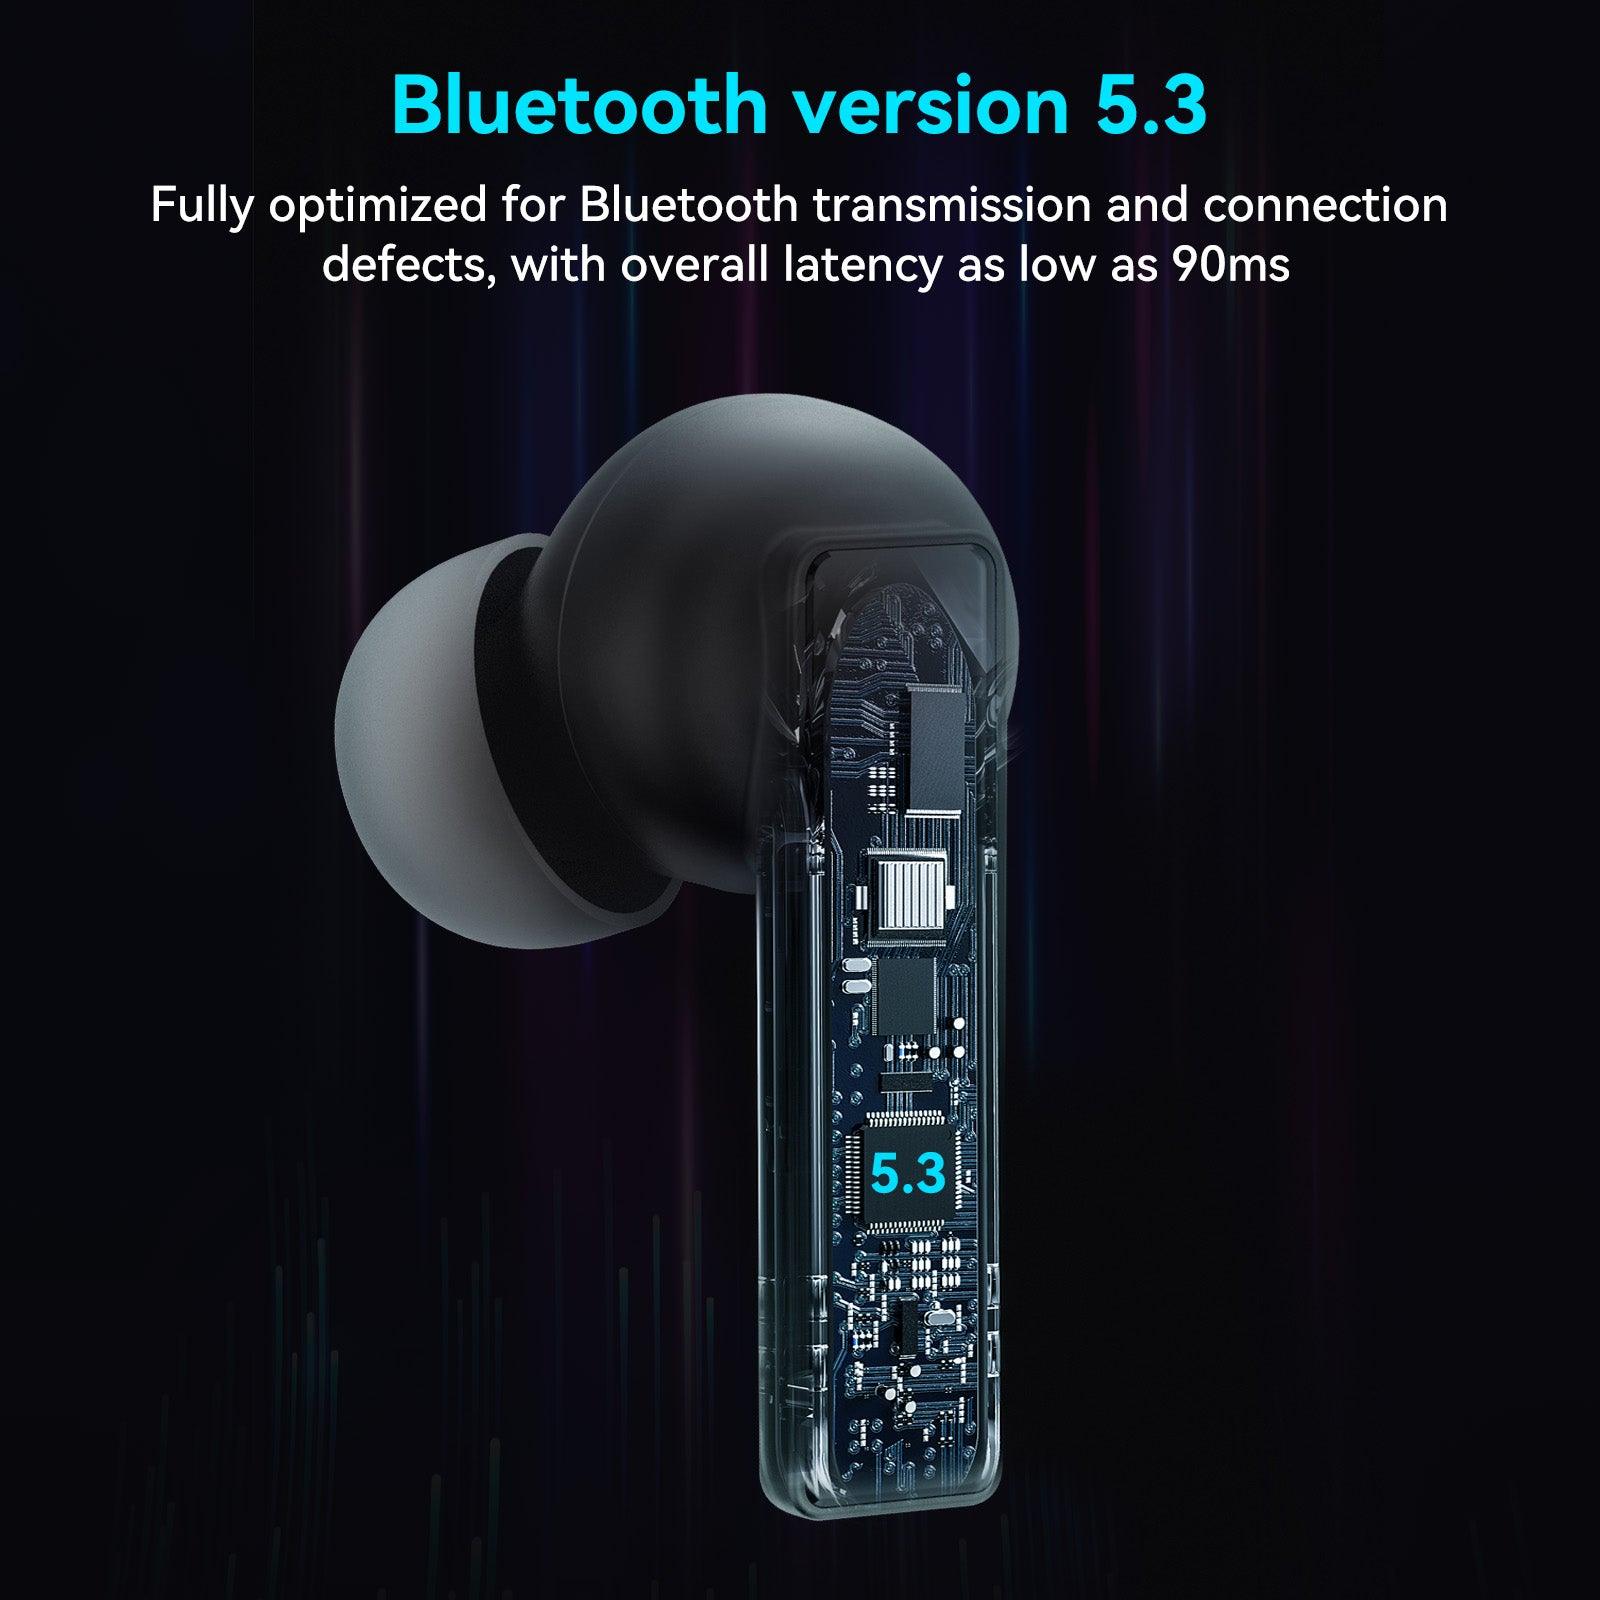 Mione MiA01 Bluetooth Earphones Metal shell All-round protection